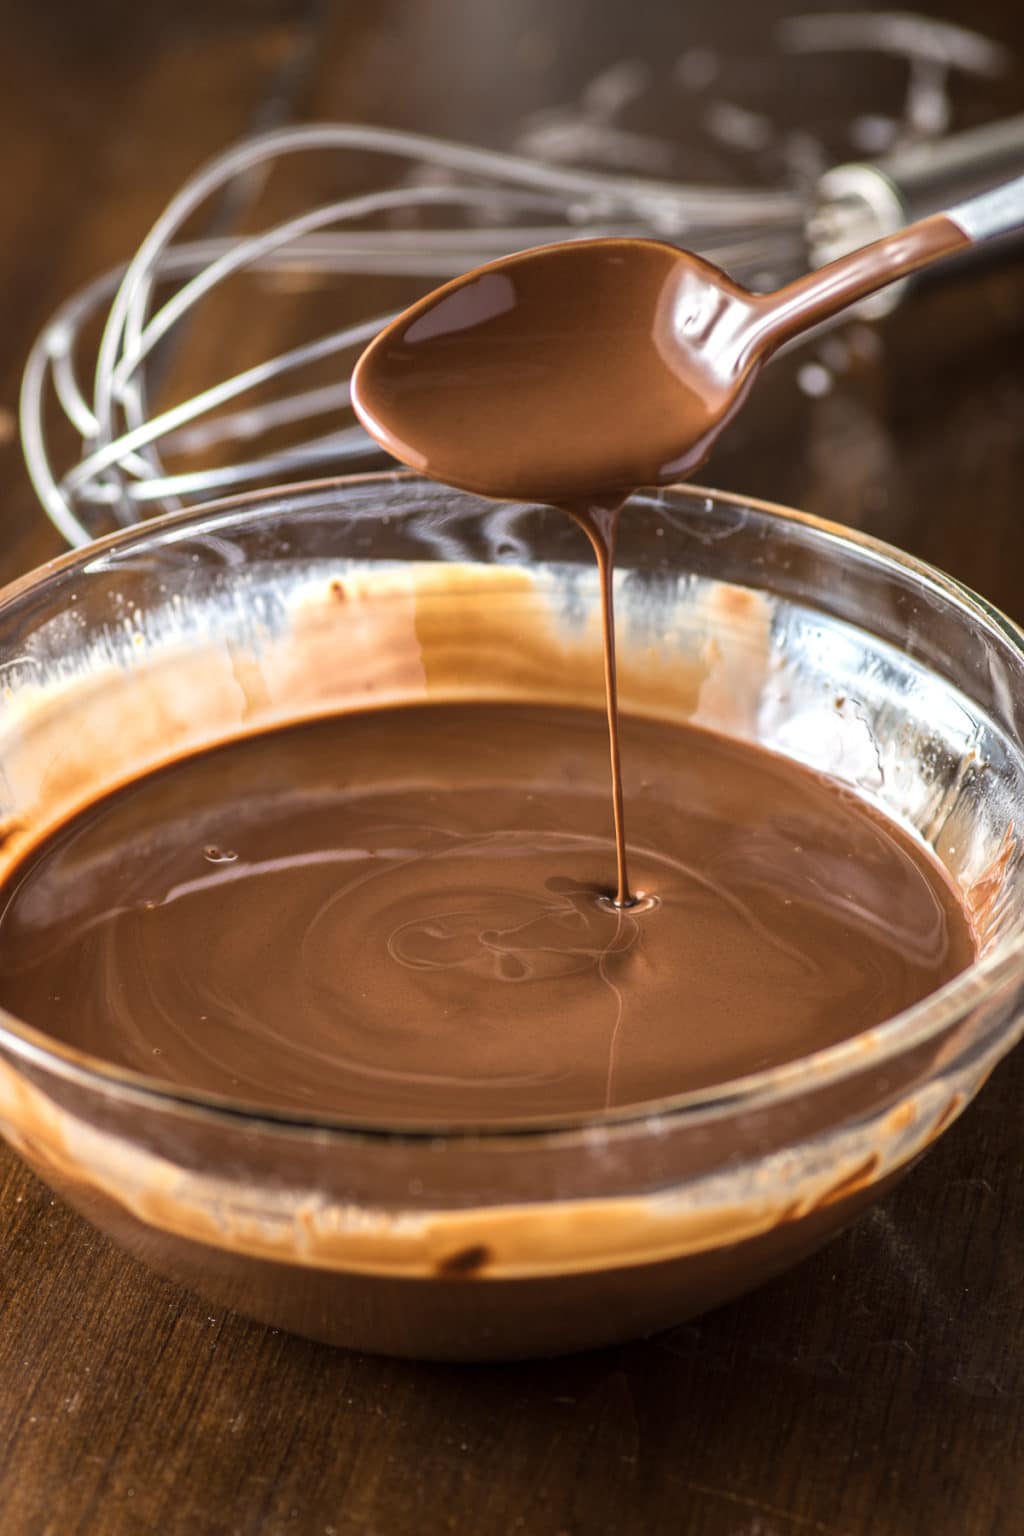 Clear glass mixing bowl full of melted chocolate with a teaspoon of melted chocolate held above and dripping into the bowl. There is a whisk in the background.